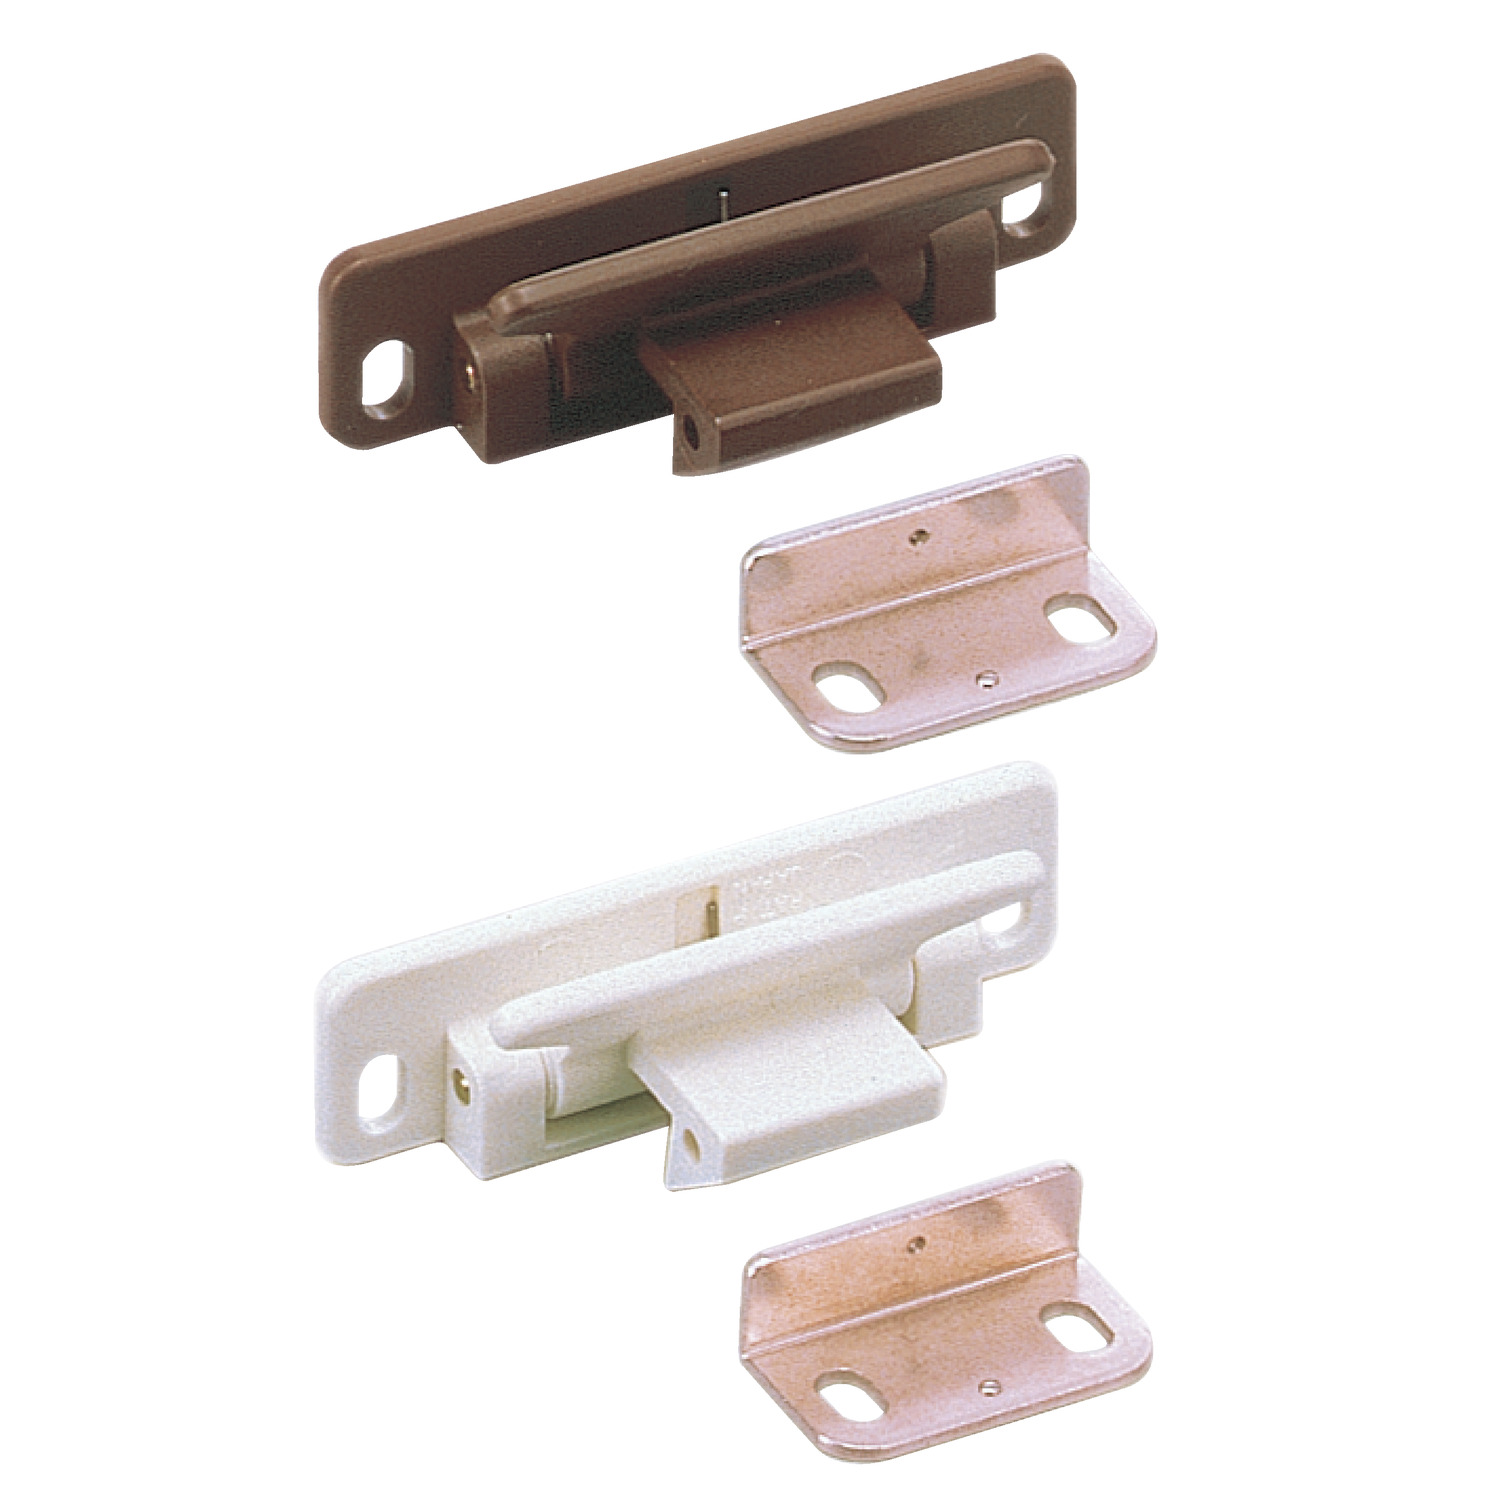 Lever Catches Finget tip lever catch of panels and cabinet doors. Leight weight polyamide plastic.